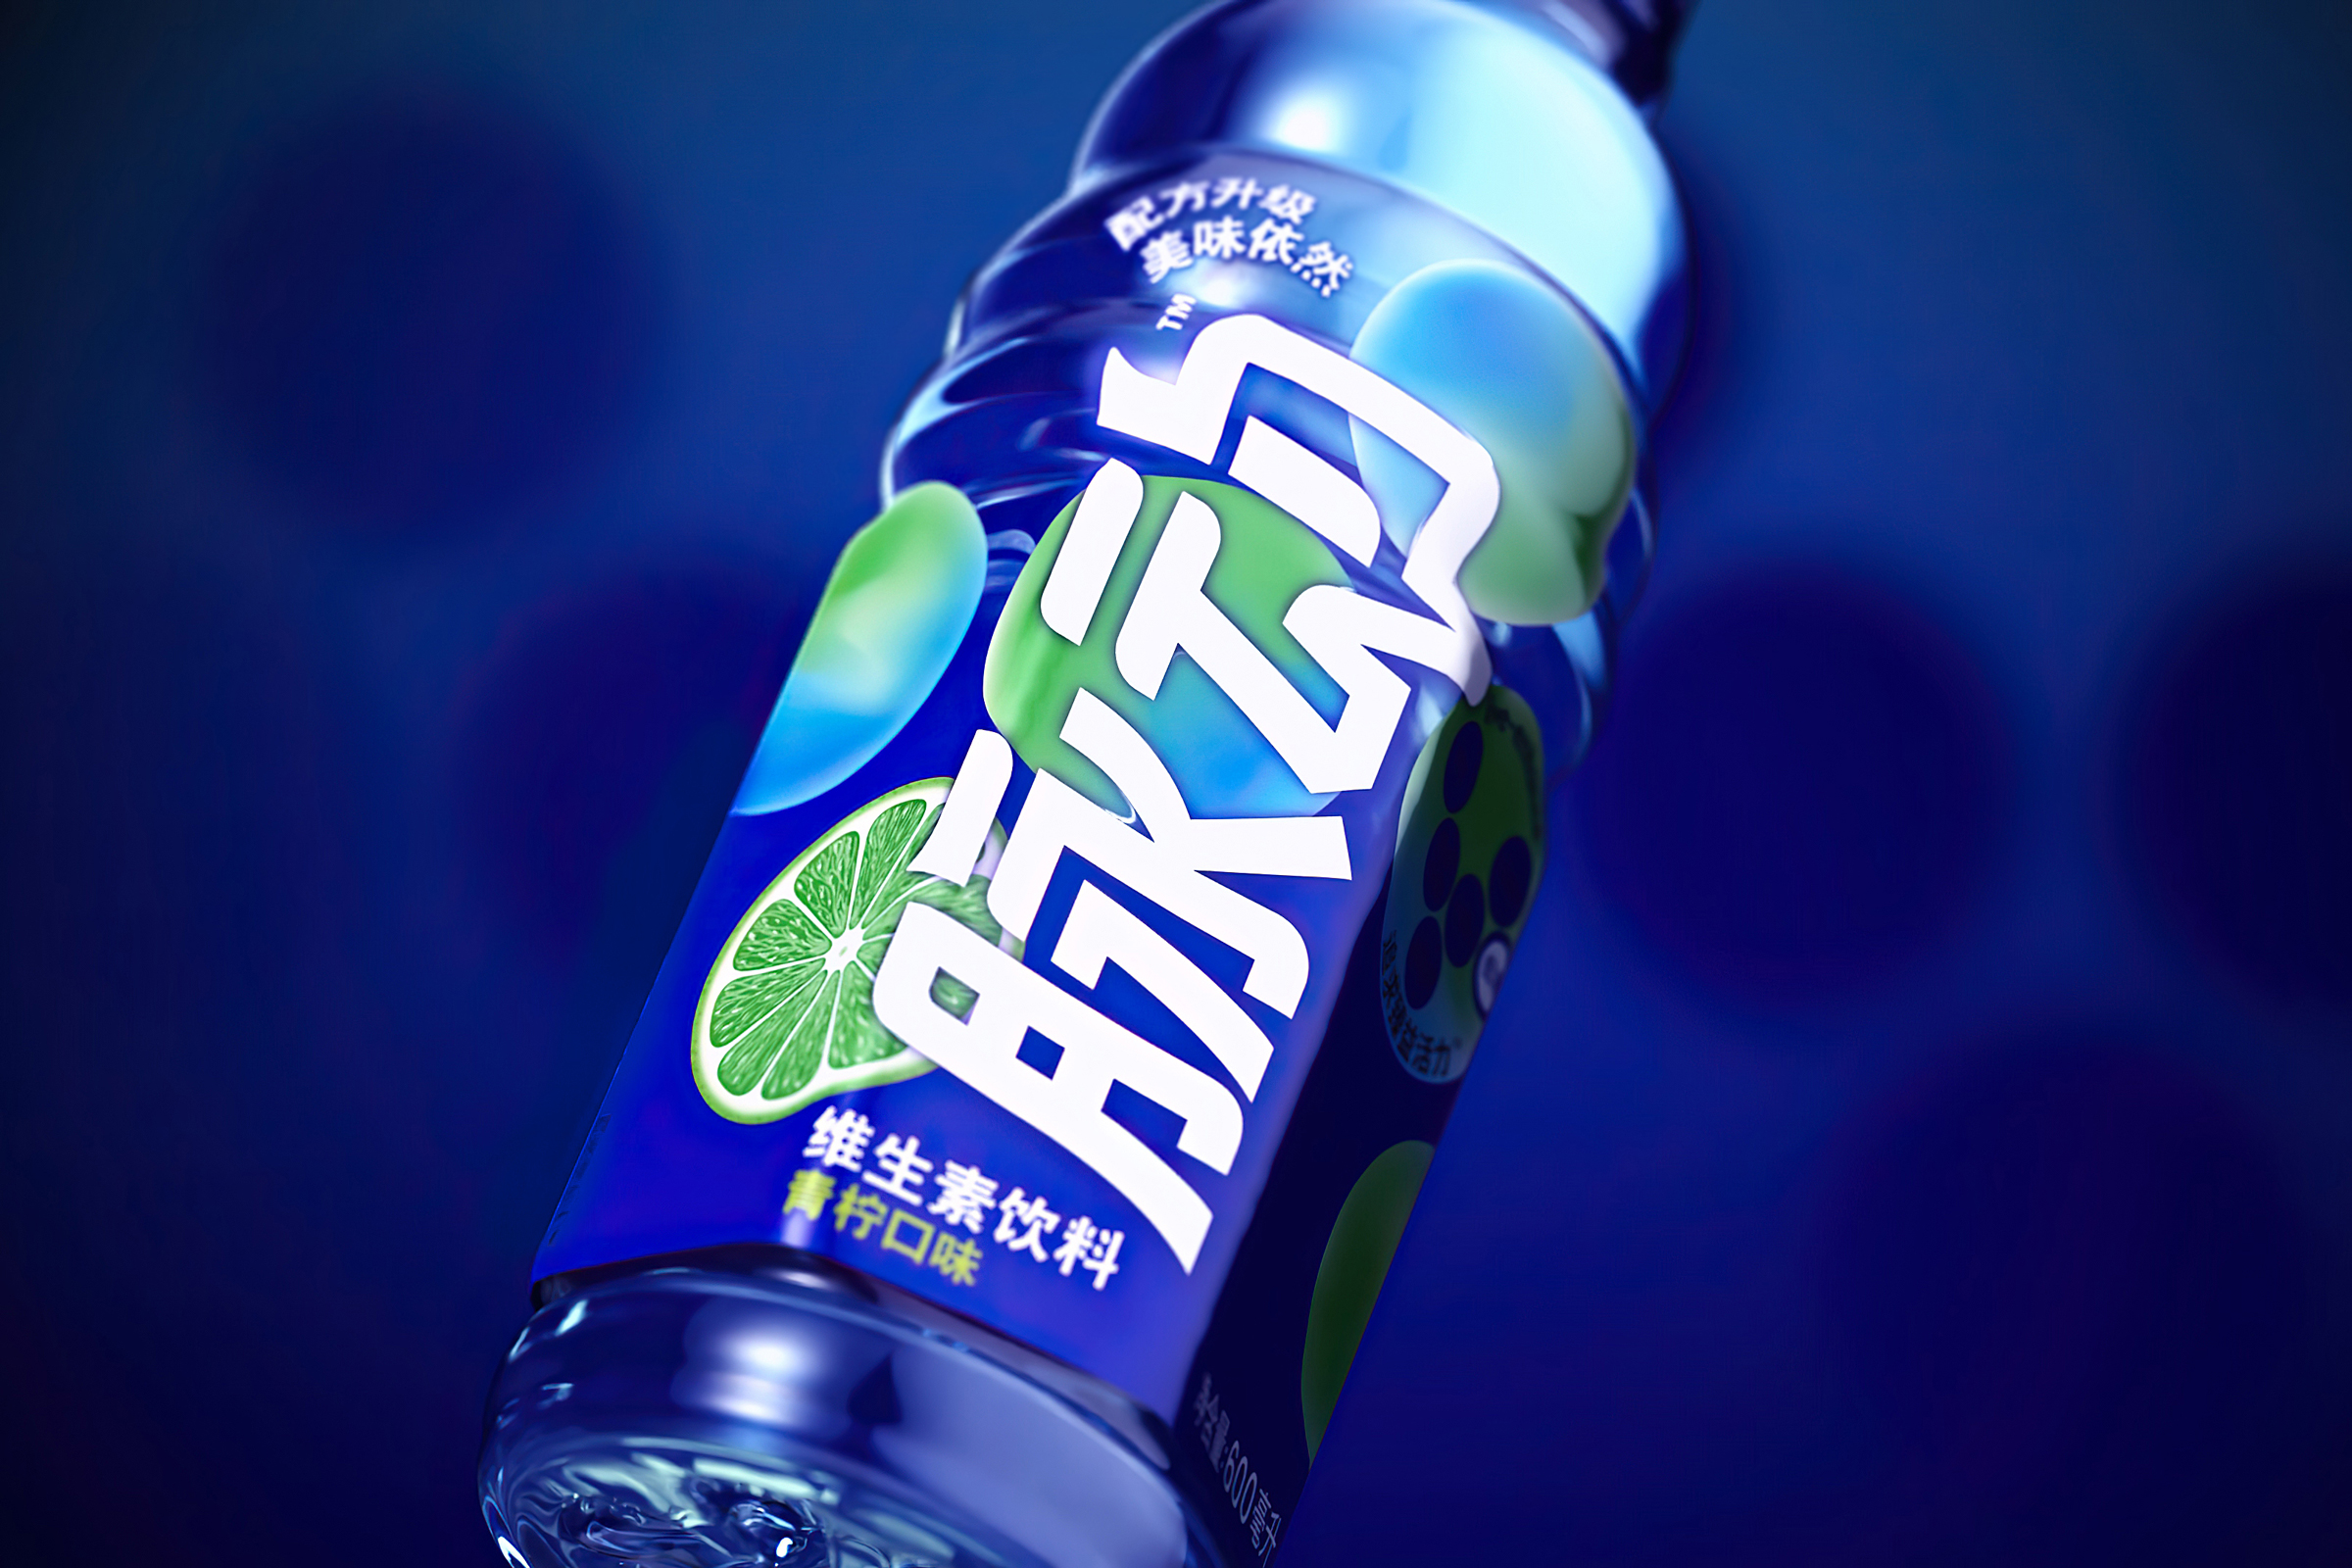 Brand Redesign of Mizone a Non-Alcoholic Beverage by Everland